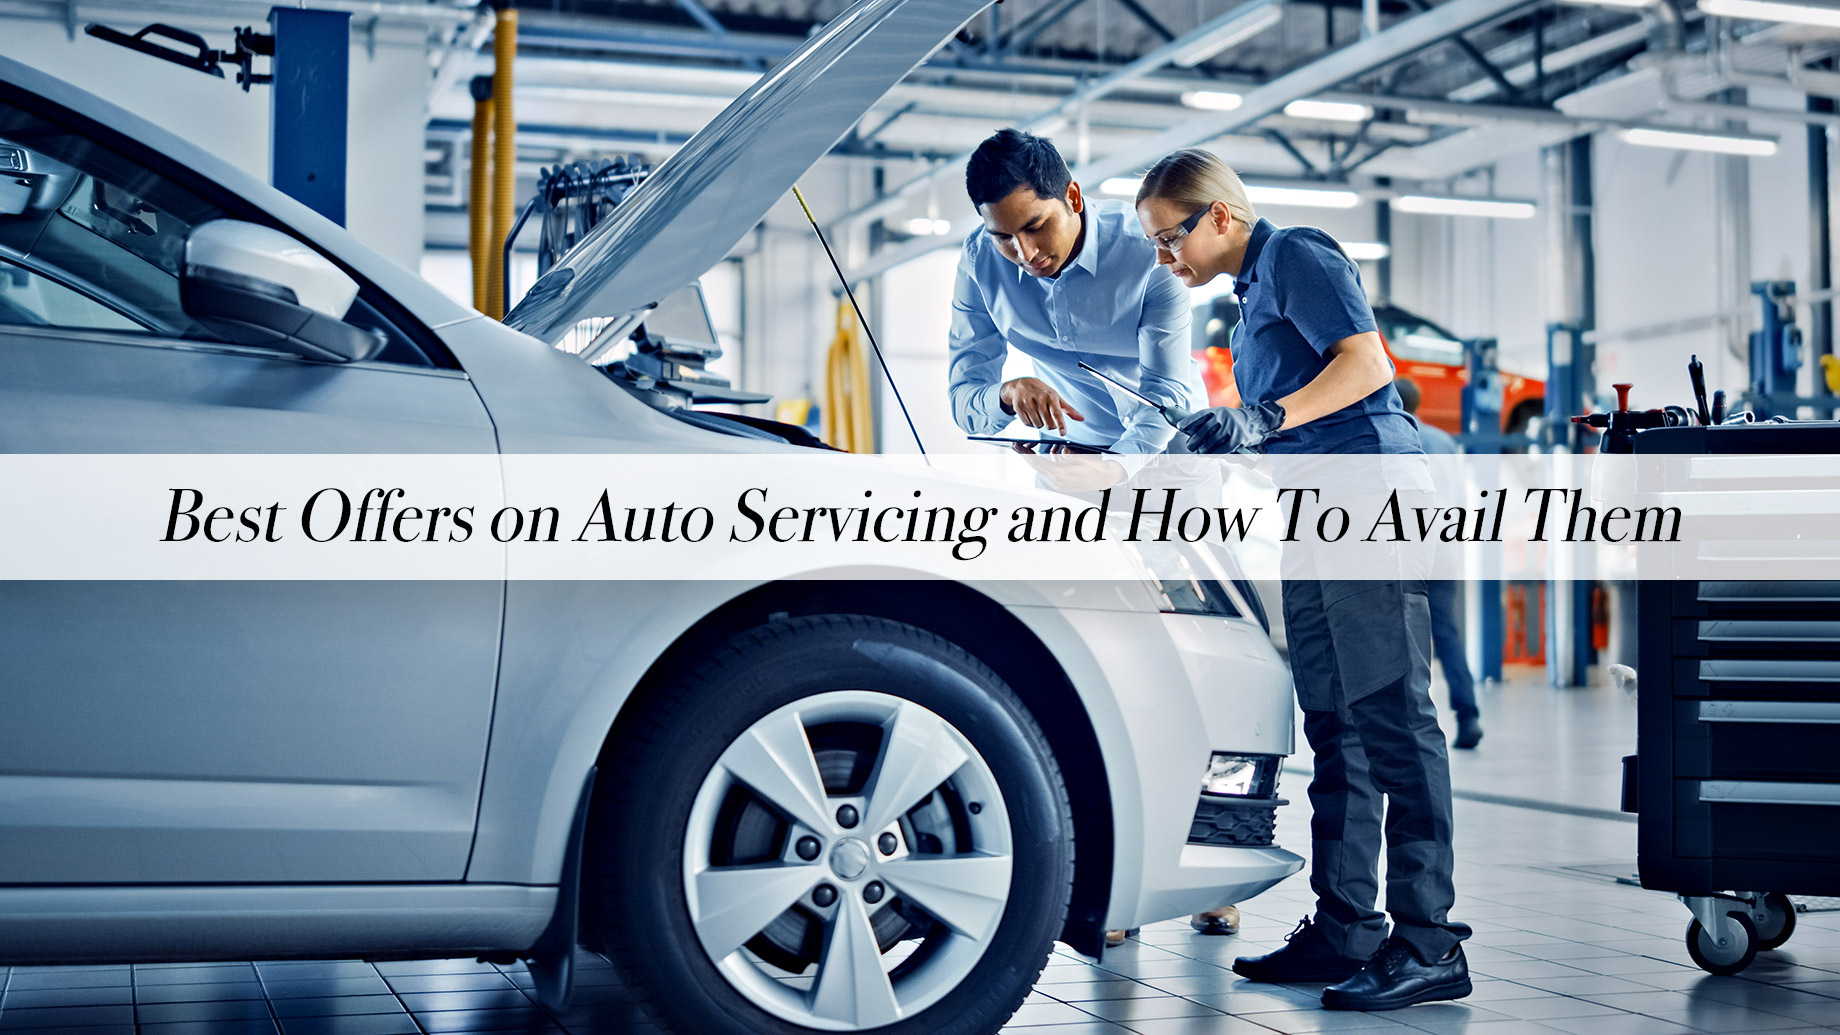 Best Offers on Auto Servicing and How To Avail Them